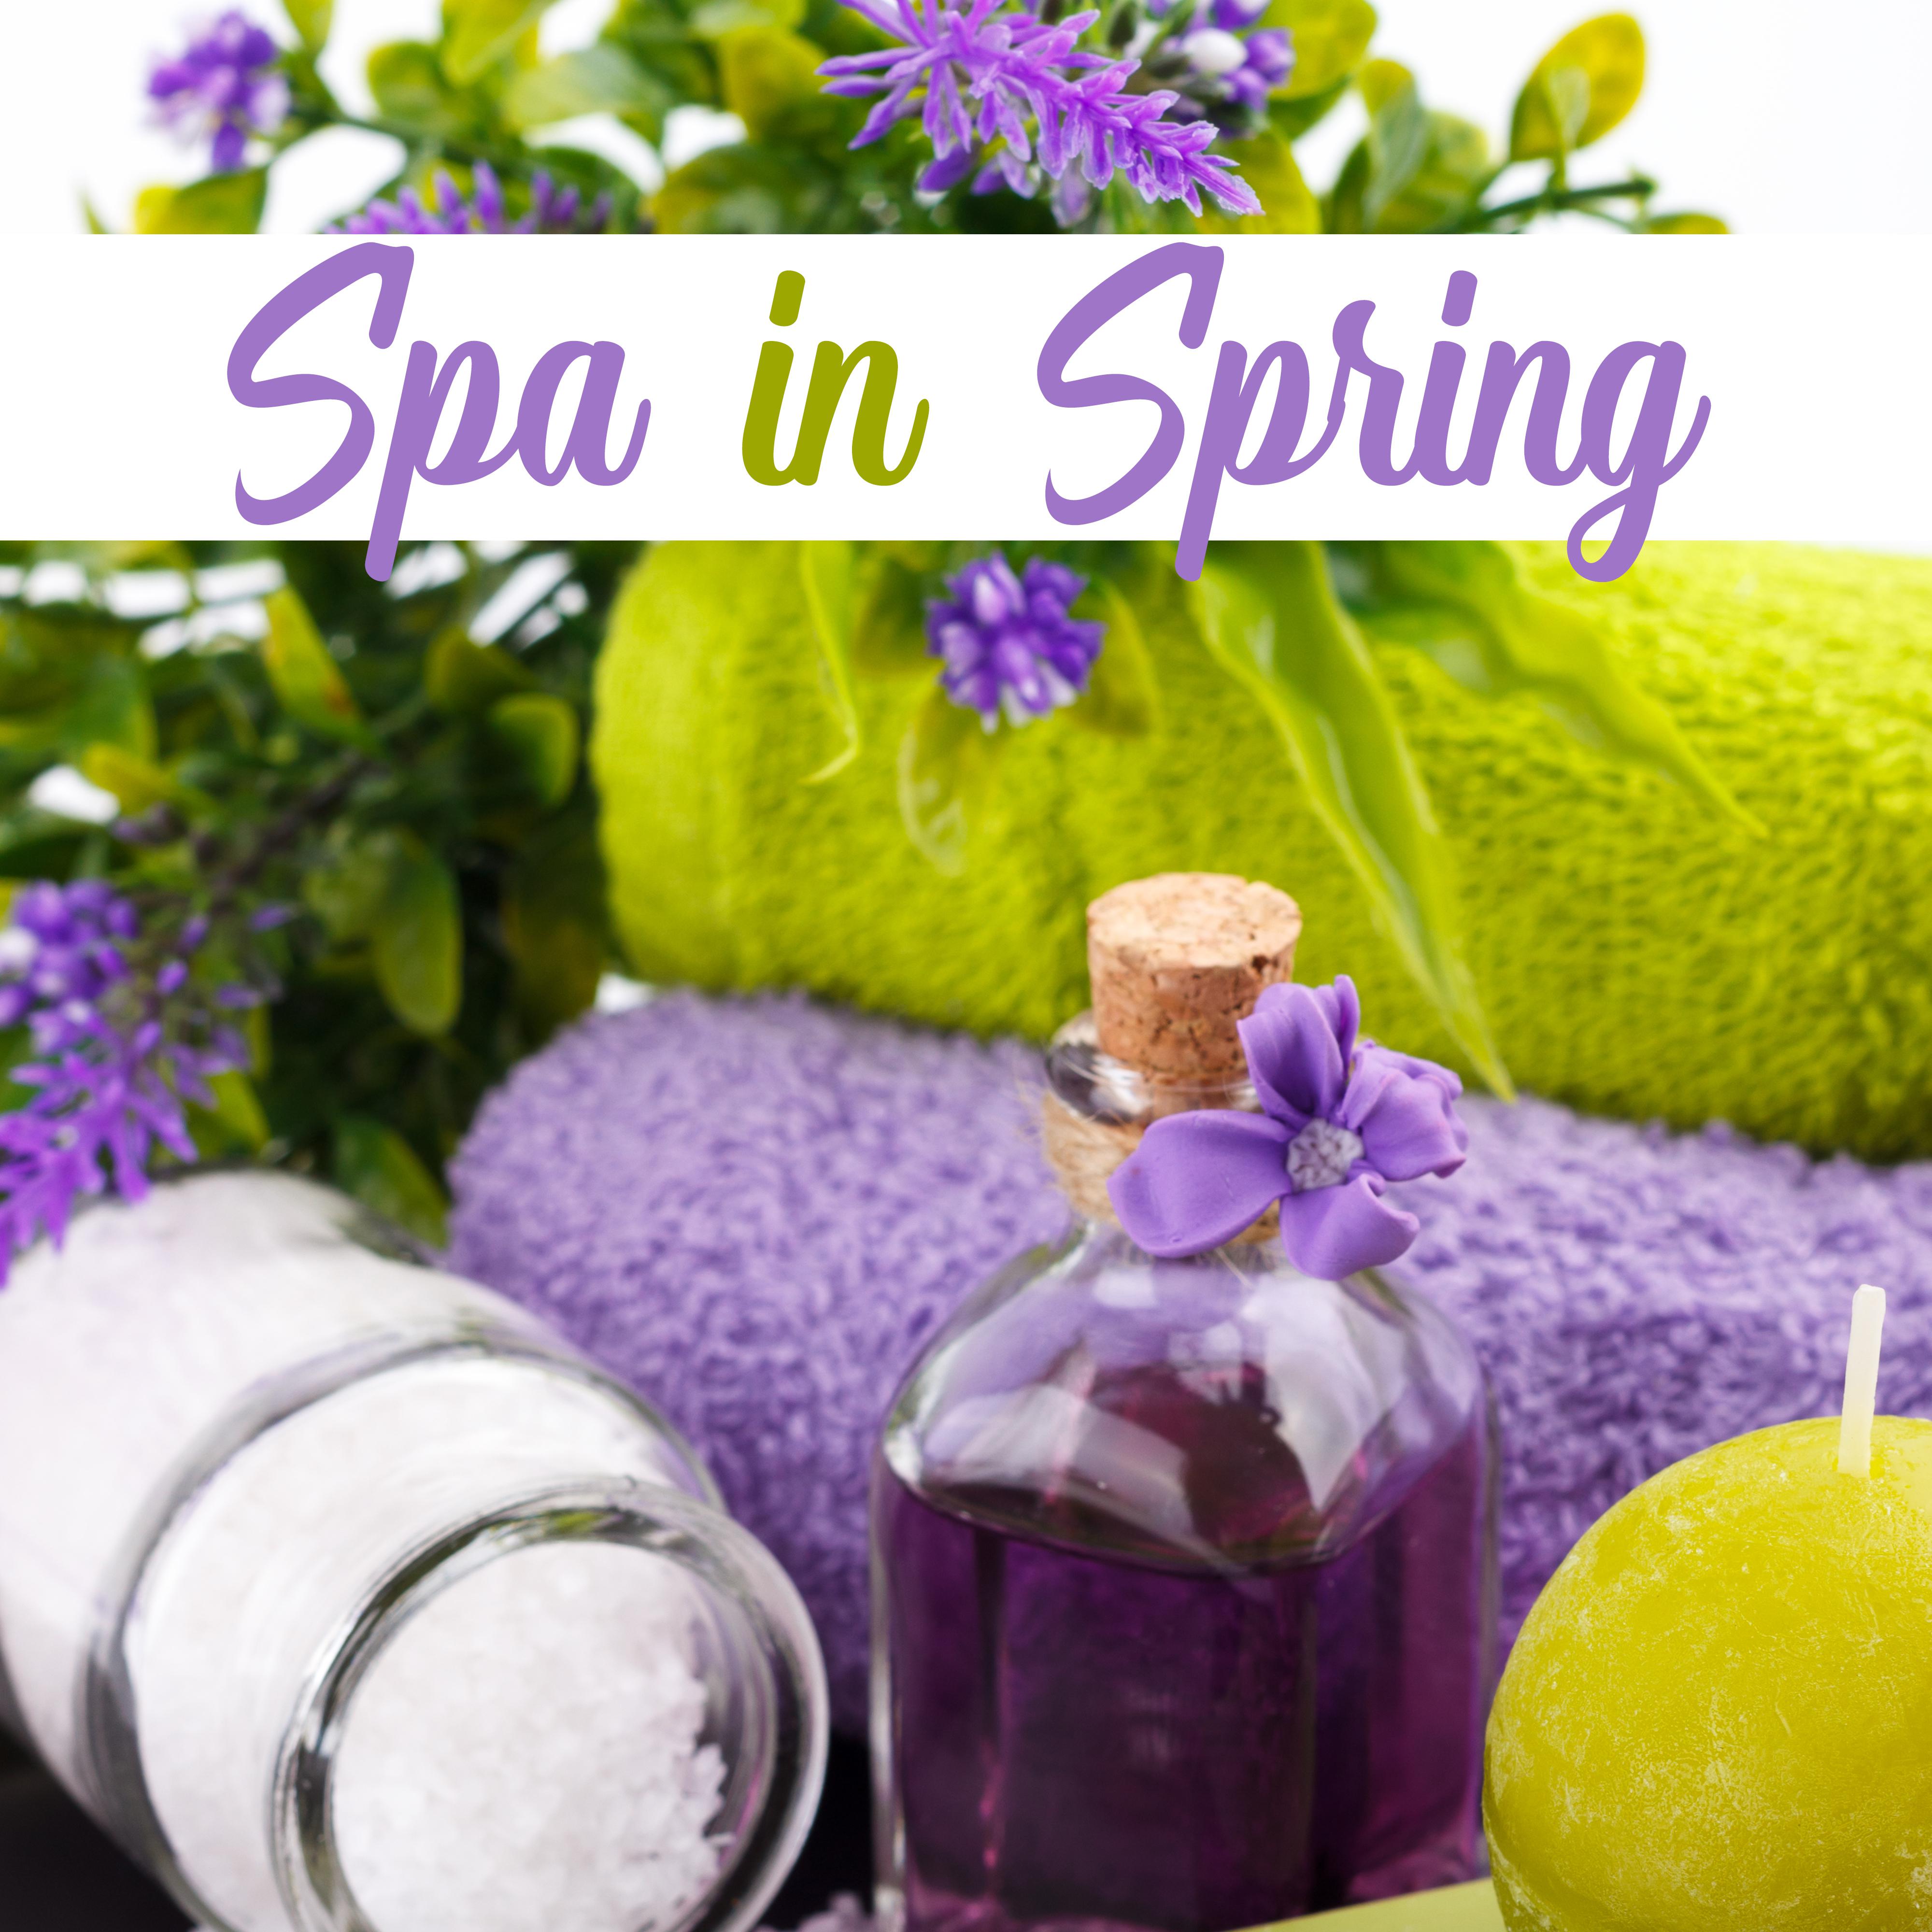 Spa in Spring - Most Beautiful Sounds of Nature, Relaxation and Wellness, Massage and Rest, Rejuvenating and Beautifying Treatments